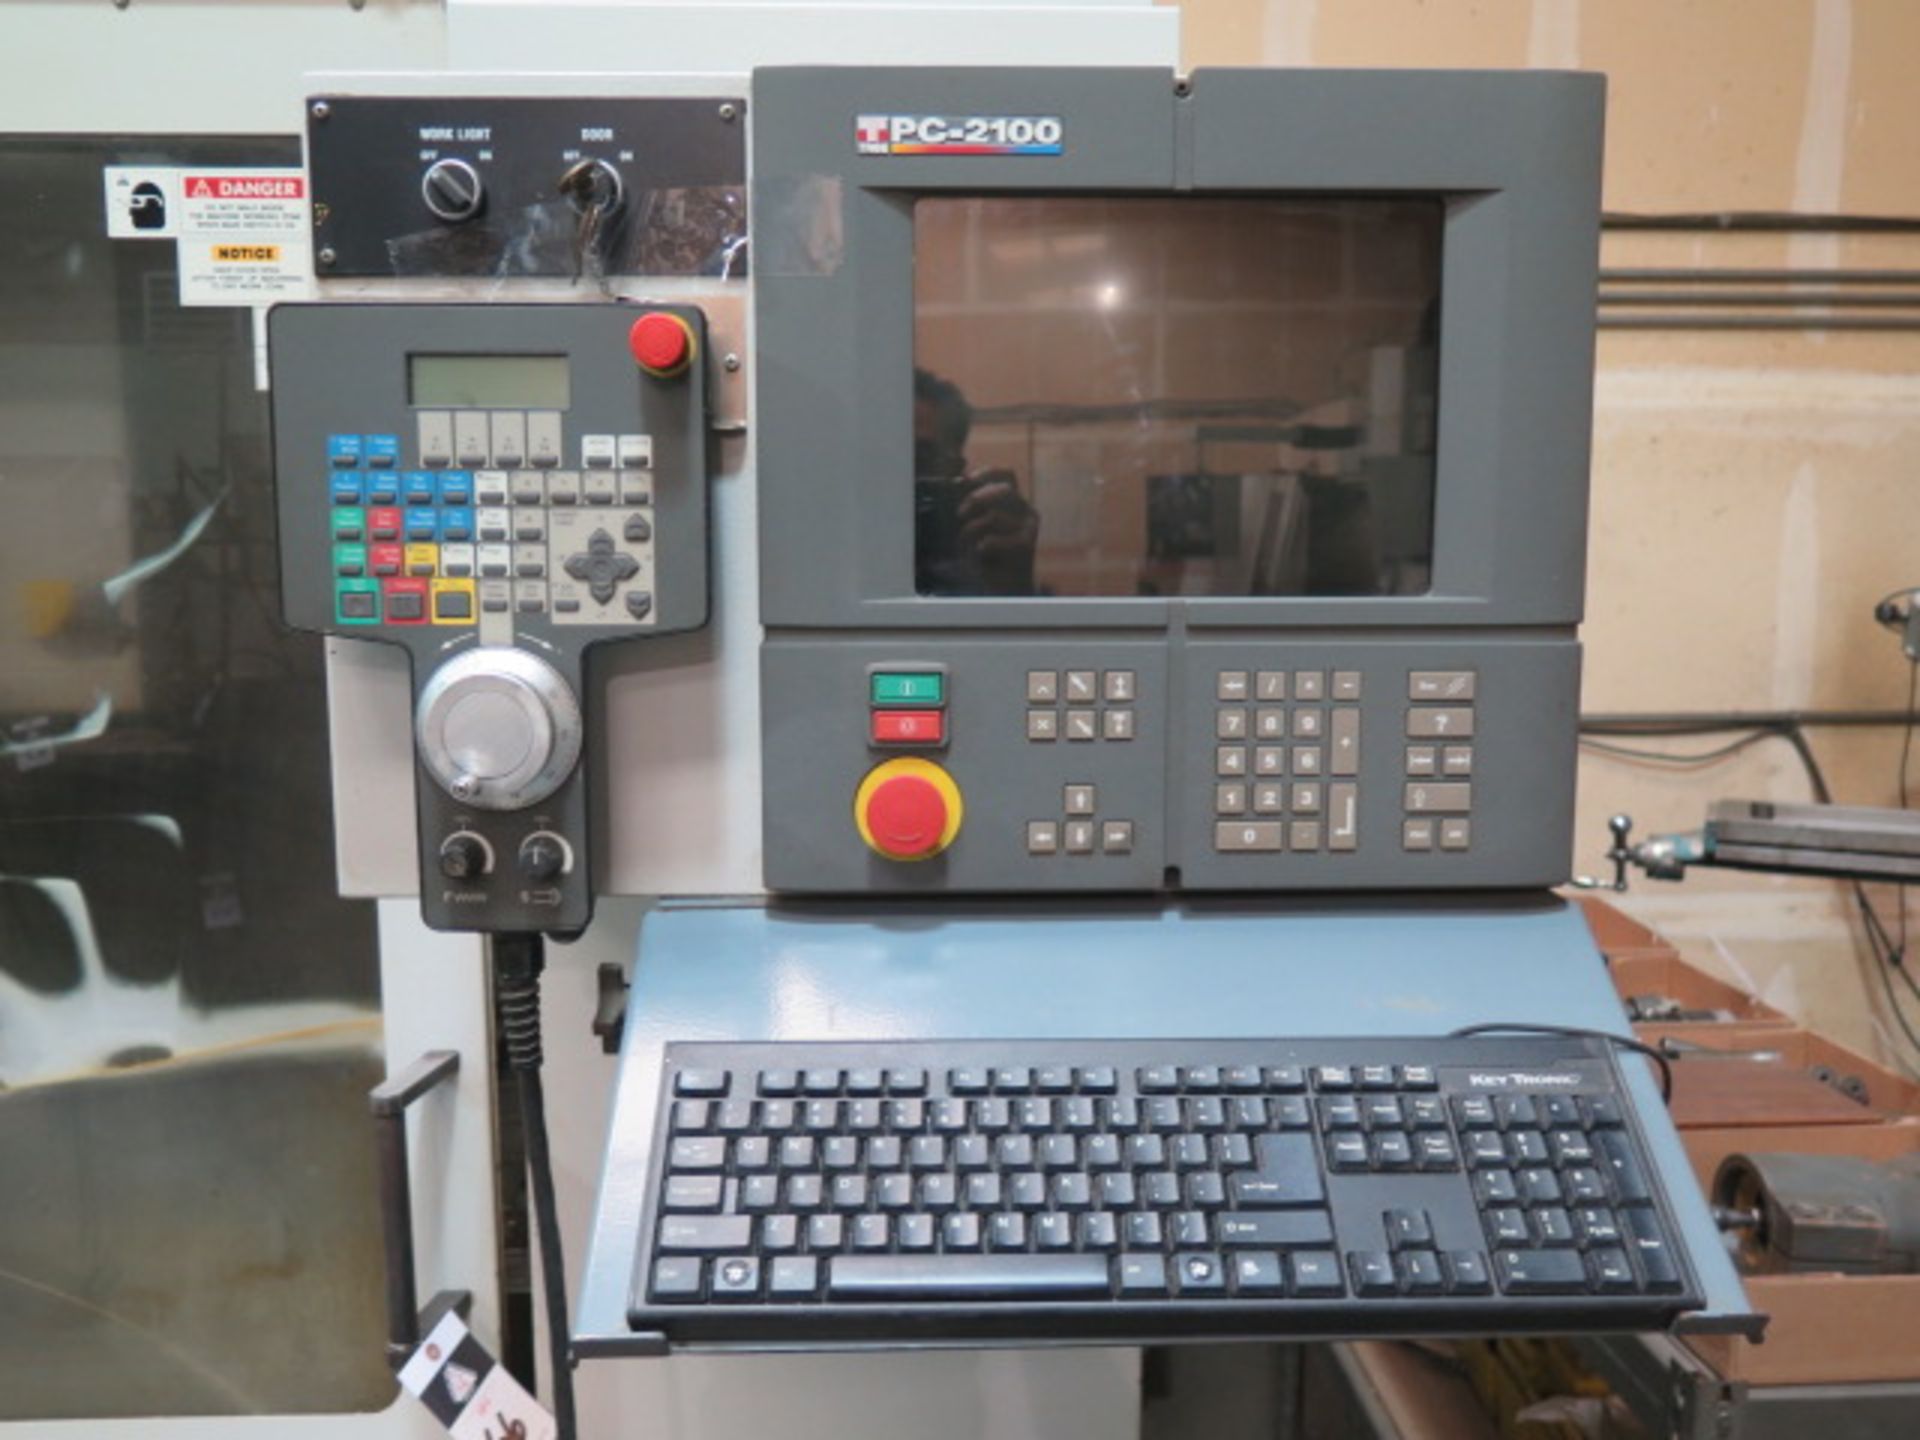 Tree / MAS VMC750 CNC Vertical Machining Center s/n 985961201 w/ Tree PC-2100 Controls, SOLD AS IS - Image 9 of 16